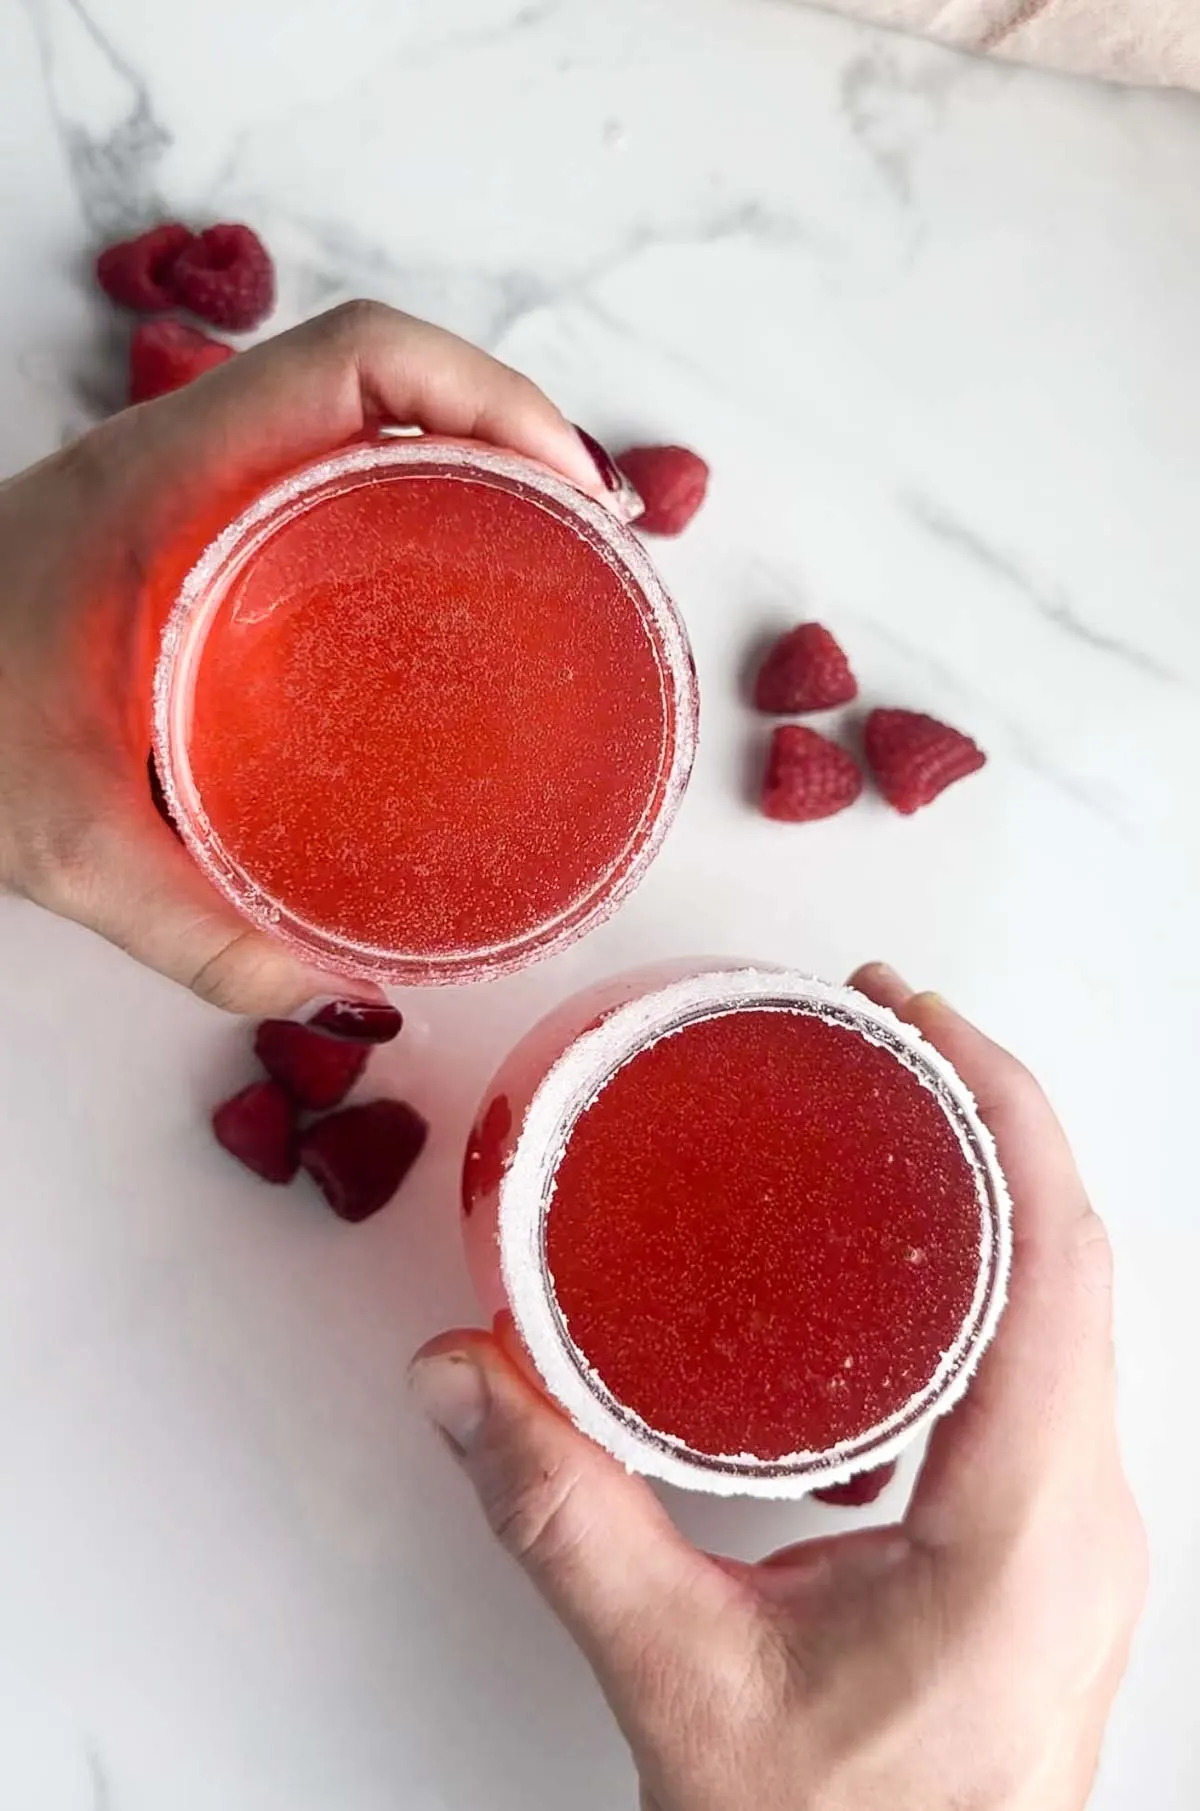 Sparkly raspberry champagne cocktails are a beautiful pink drink perfect for the holidays, Valentine's Day, date night in, or special spring and summer occasions. These raspberry cocktails feature sparkling wine, raspberry simple syrup and a shot of flavored vodka.